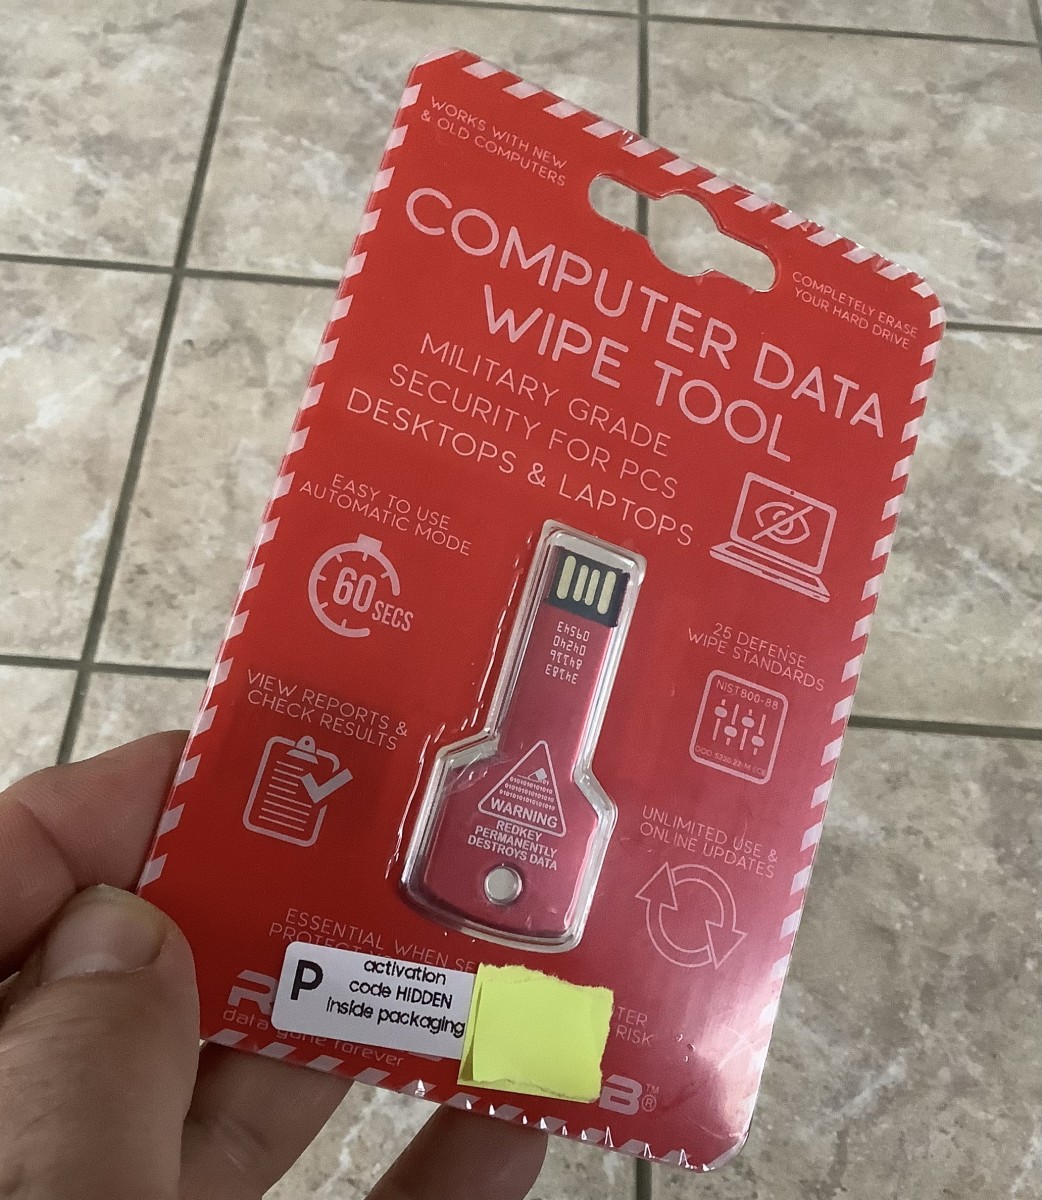 redkey-usb-really-is-the-computer-data-wipe-tool